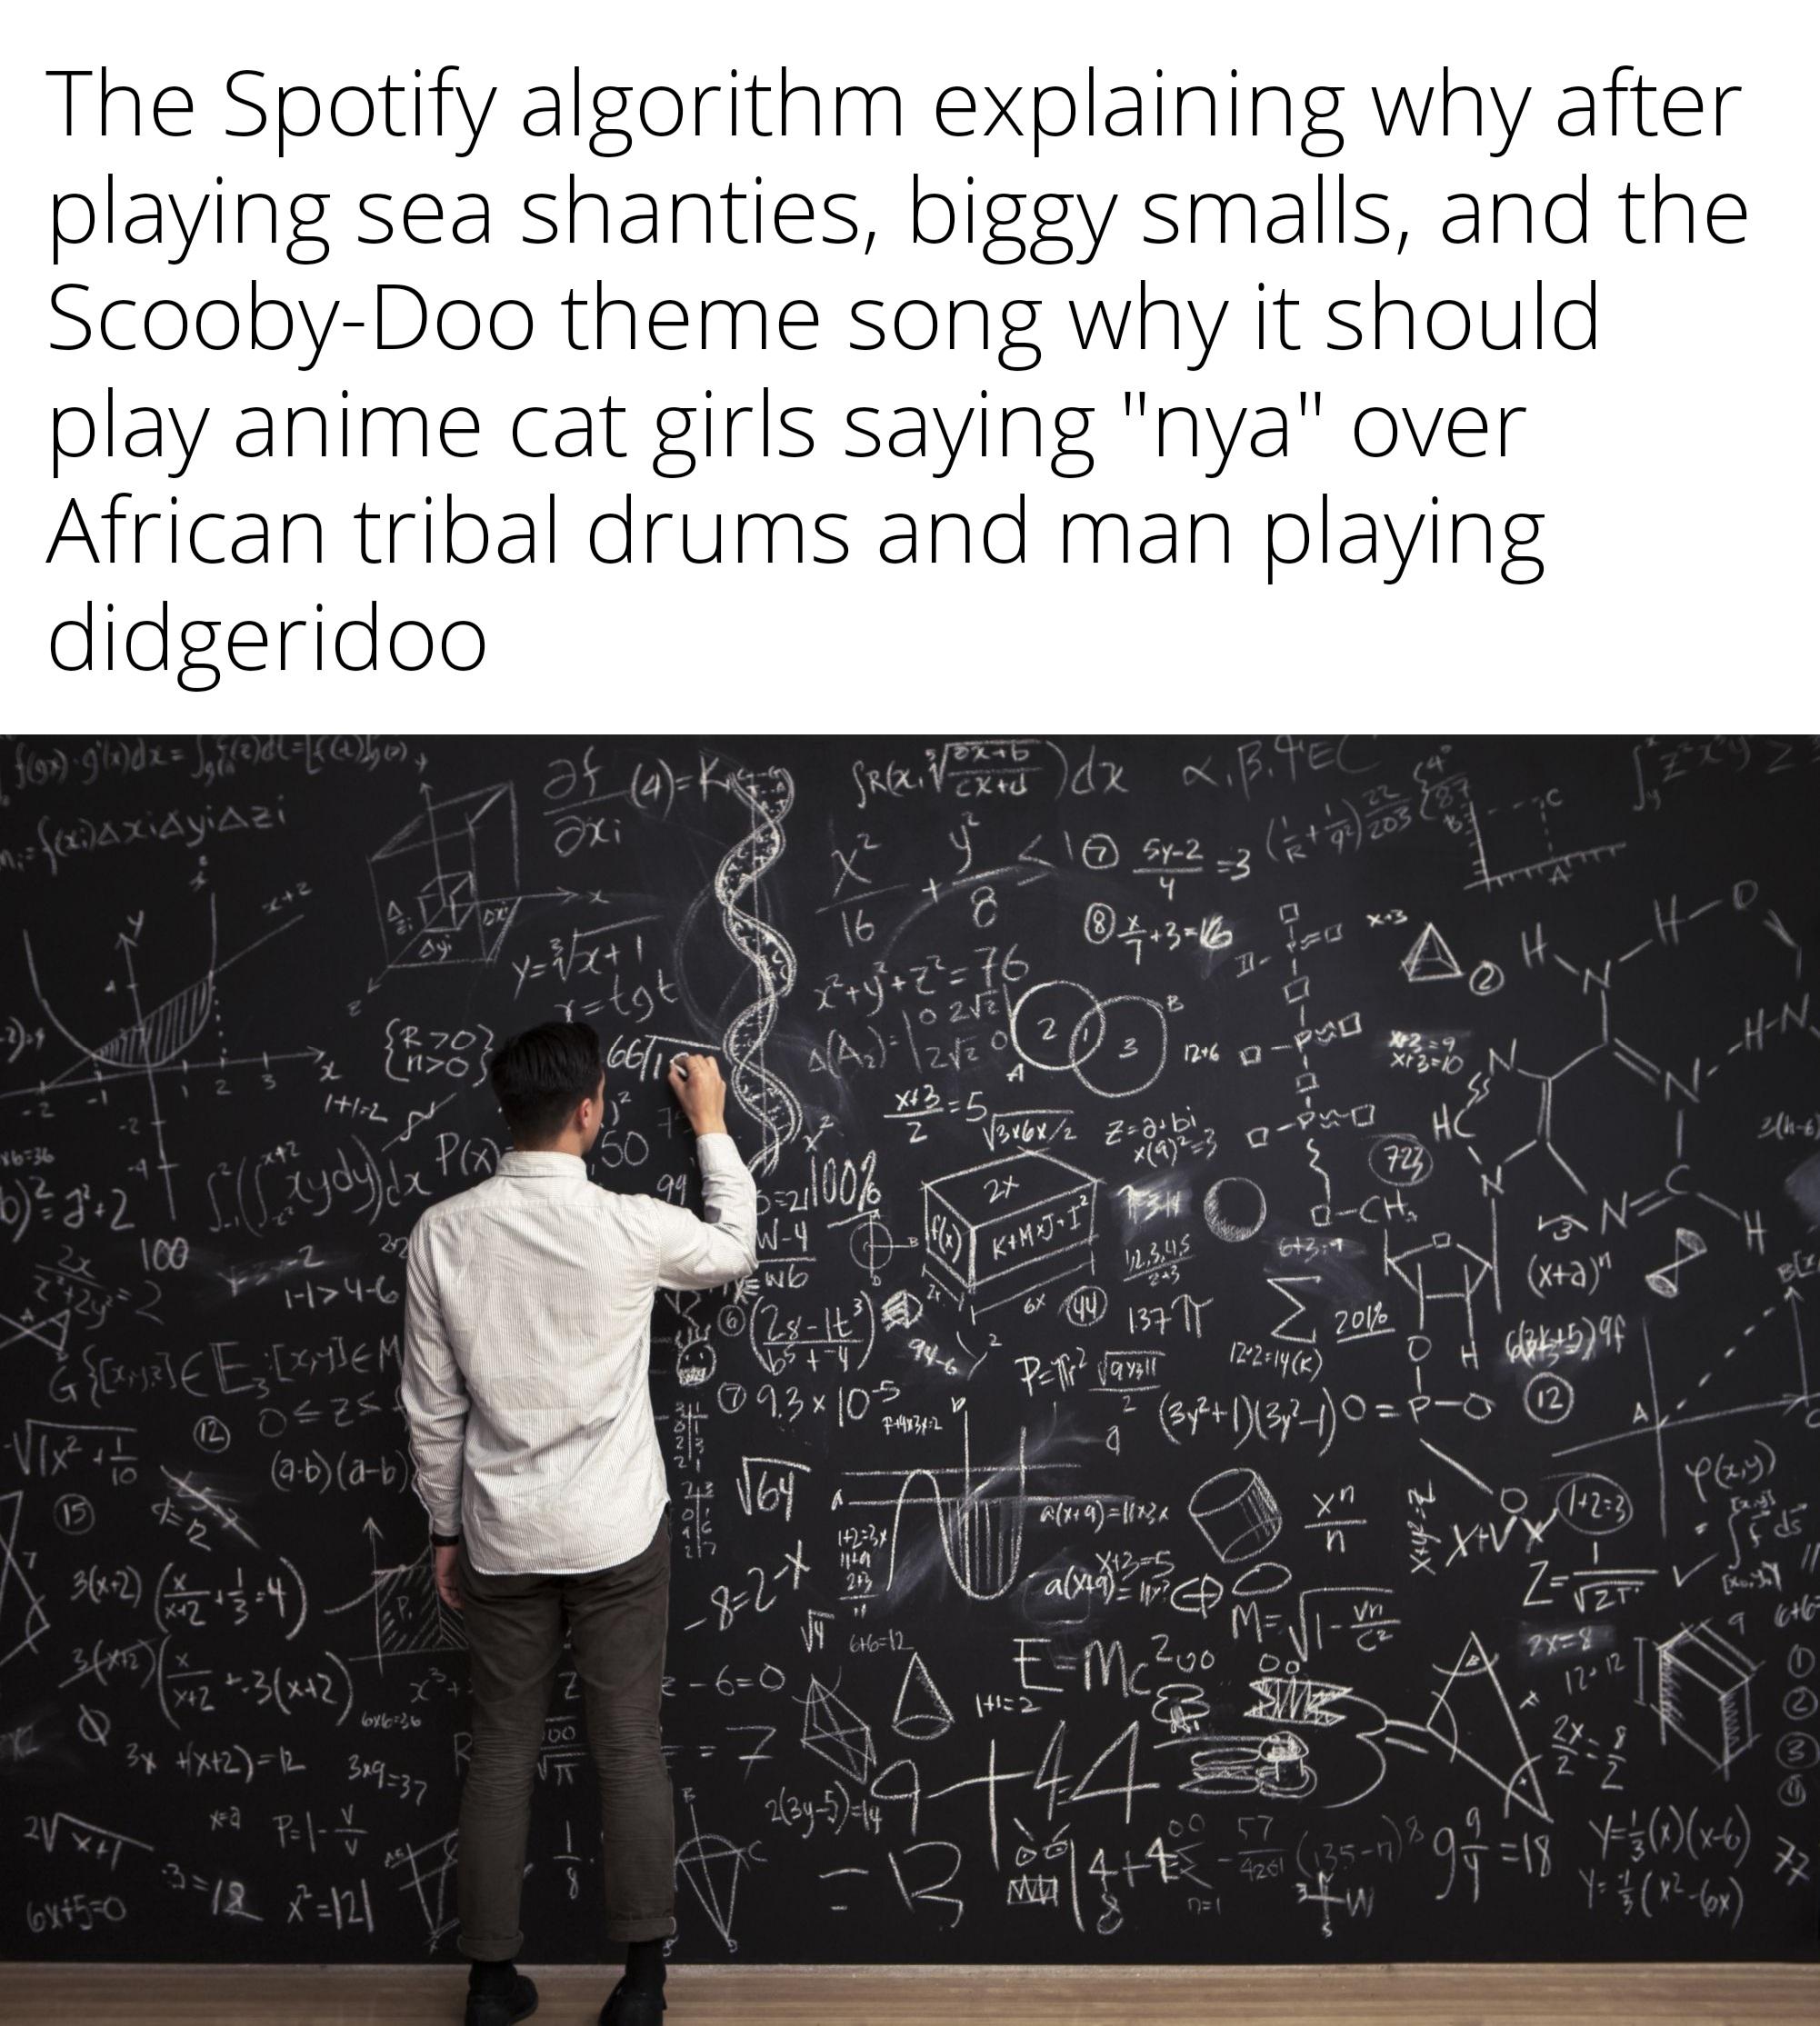 math equation chalkboard - The Spotify algorithm explaining why after playing sea shanties, biggy smalls, and the ScoobyDoo theme song why it should play anime cat girls saying "nya" over African tribal drums and man playing didgeridoo face dx Nete 24276 